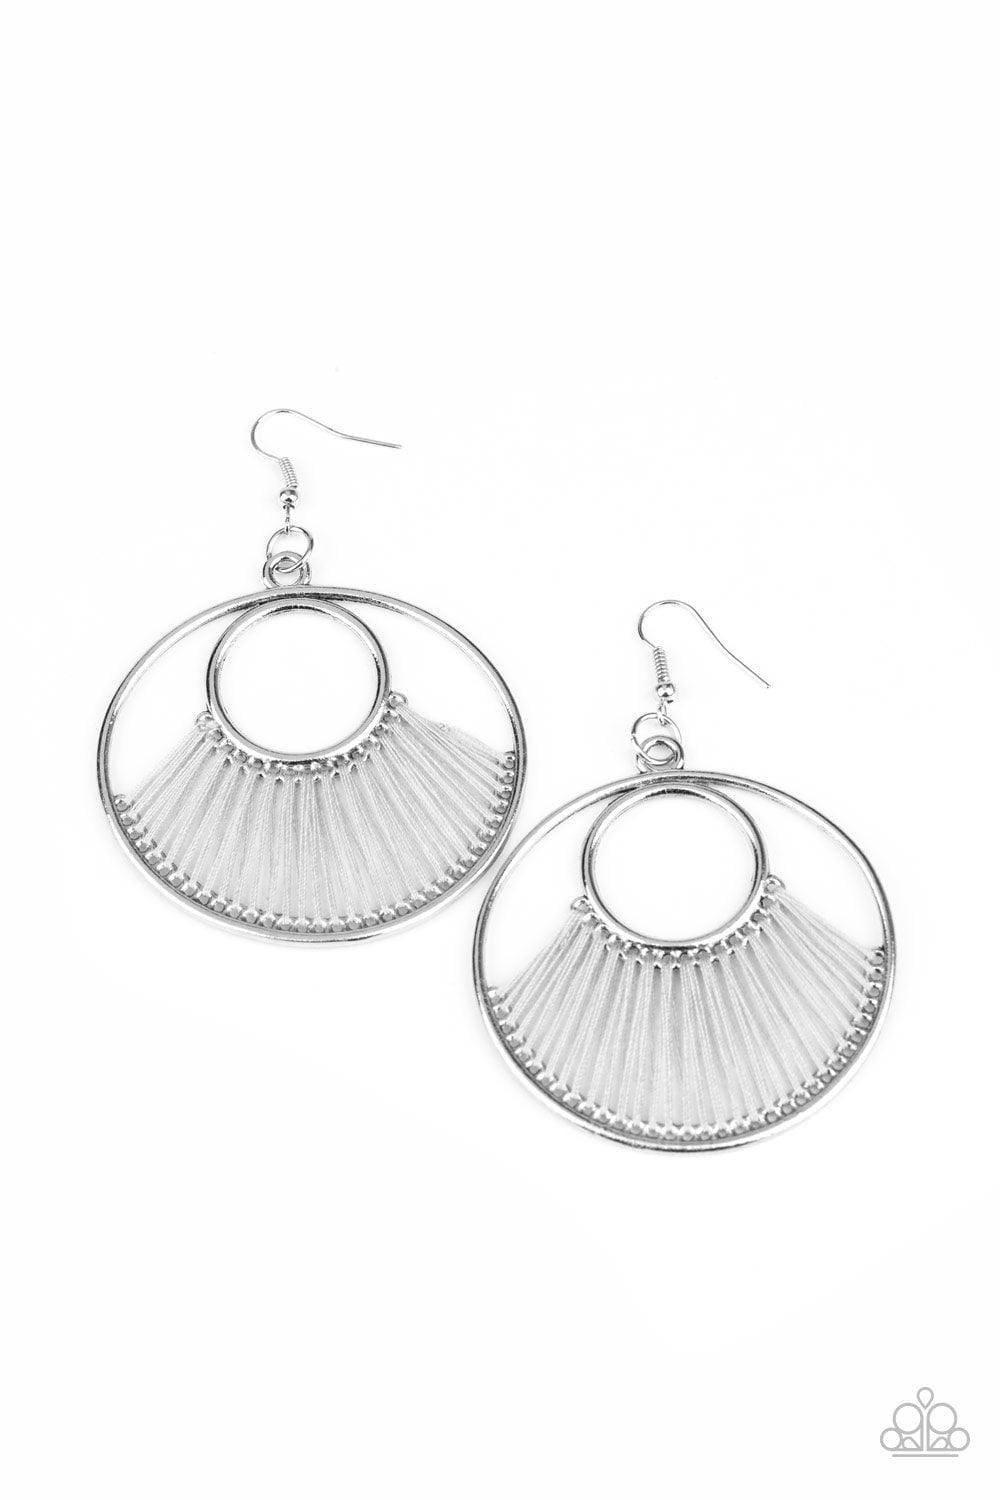 Paparazzi Accessories - Really High-strung - Silver Earrings - Bling by JessieK